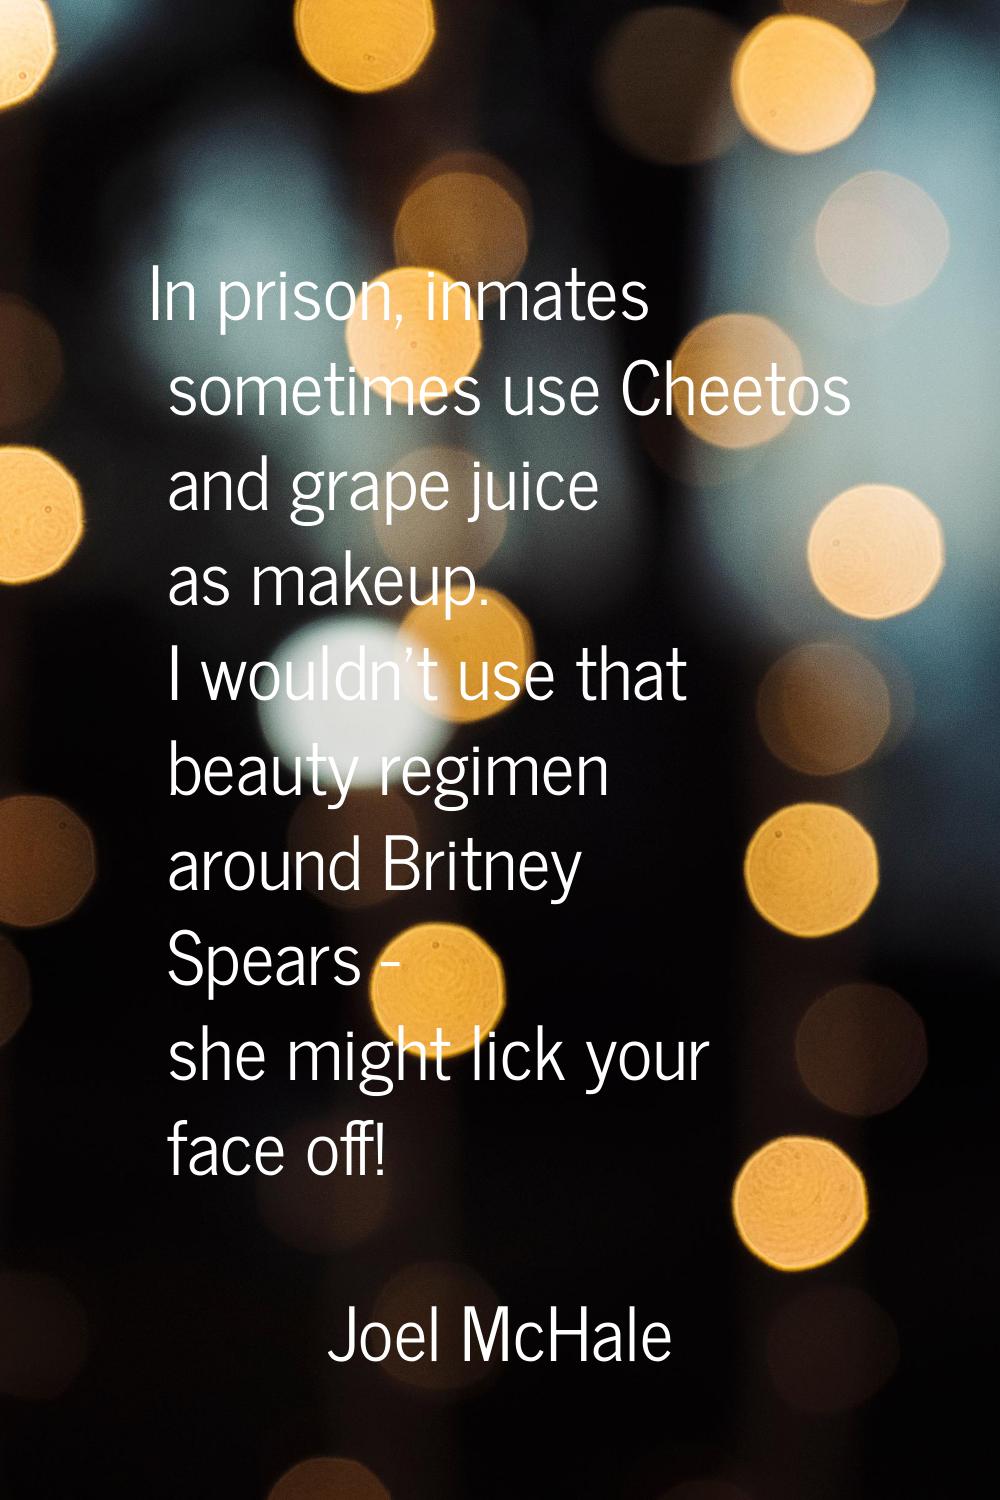 In prison, inmates sometimes use Cheetos and grape juice as makeup. I wouldn't use that beauty regi